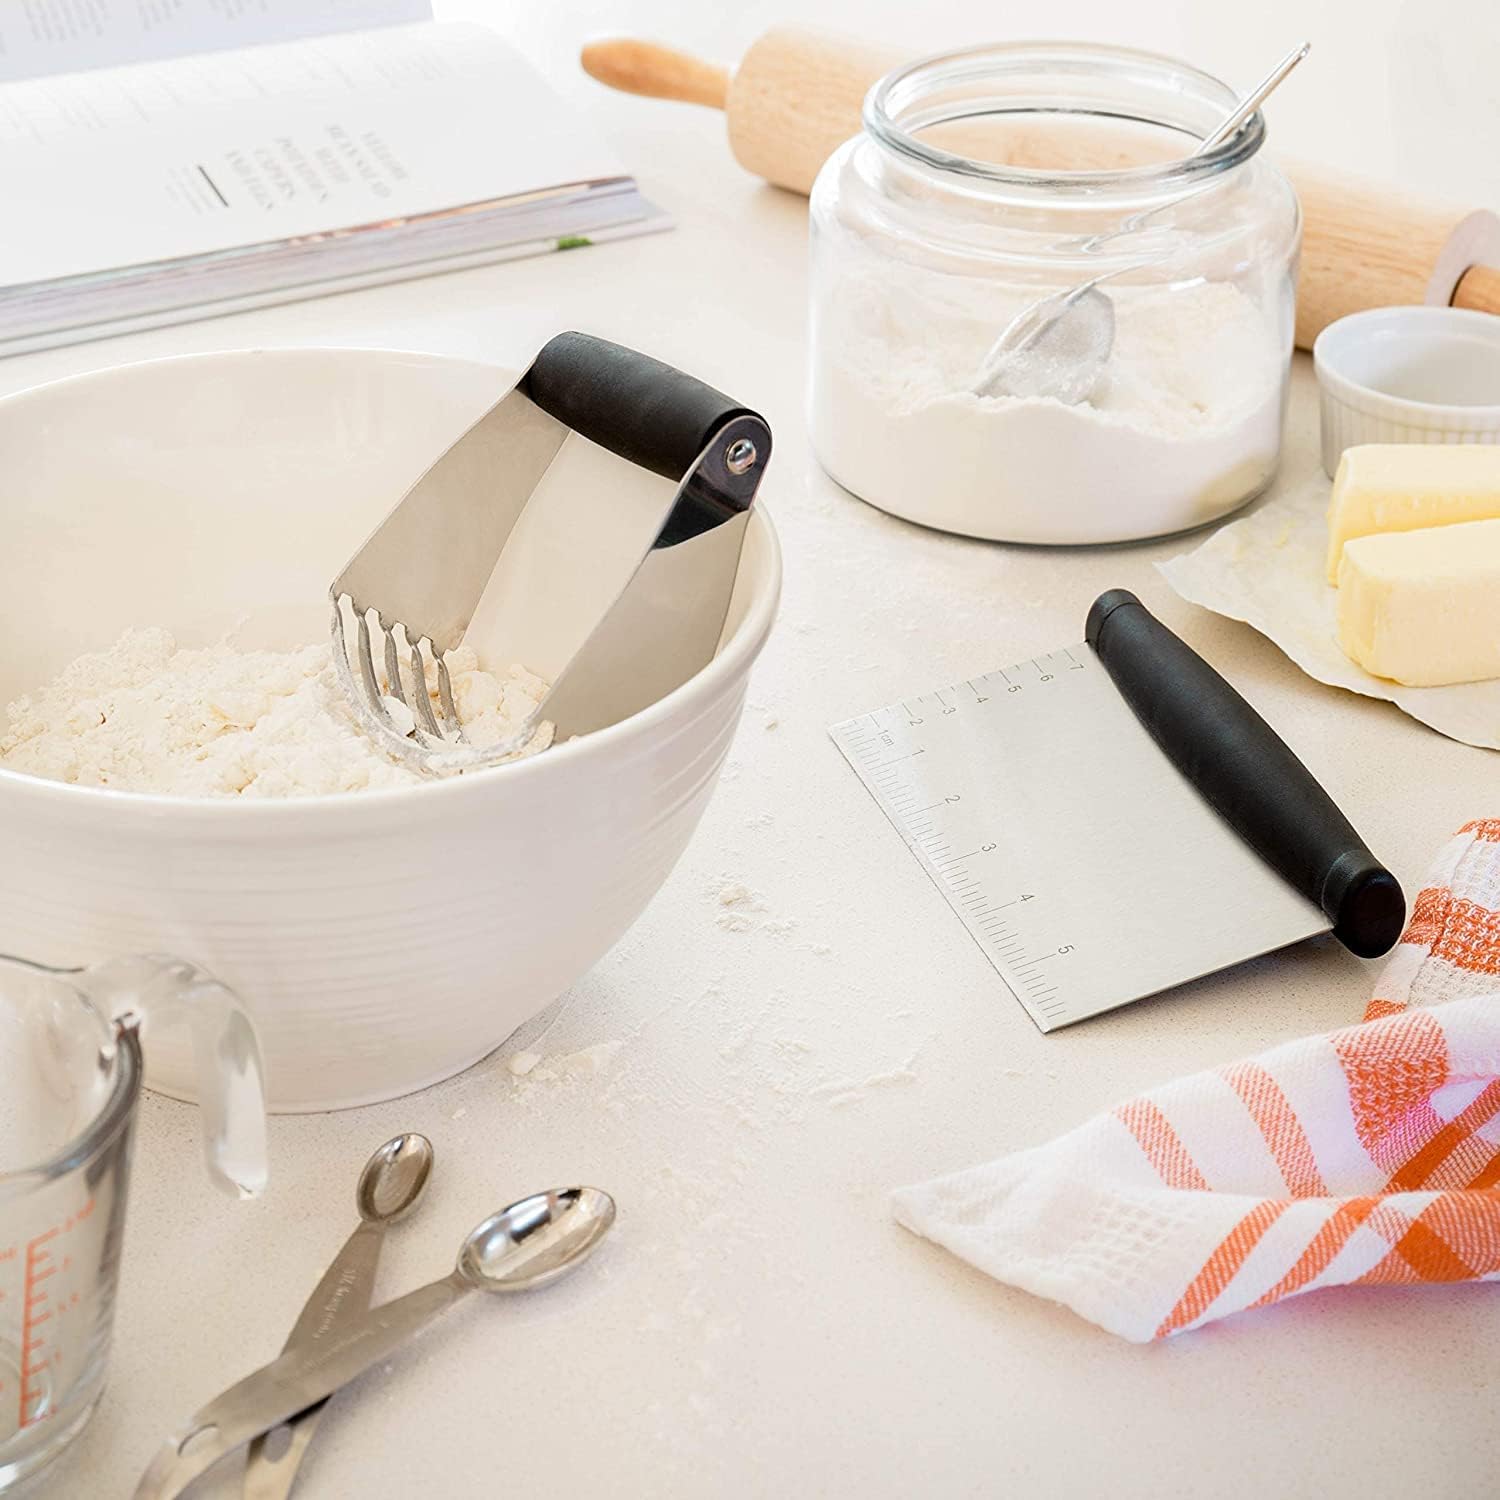 What Is a Pastry Blender?